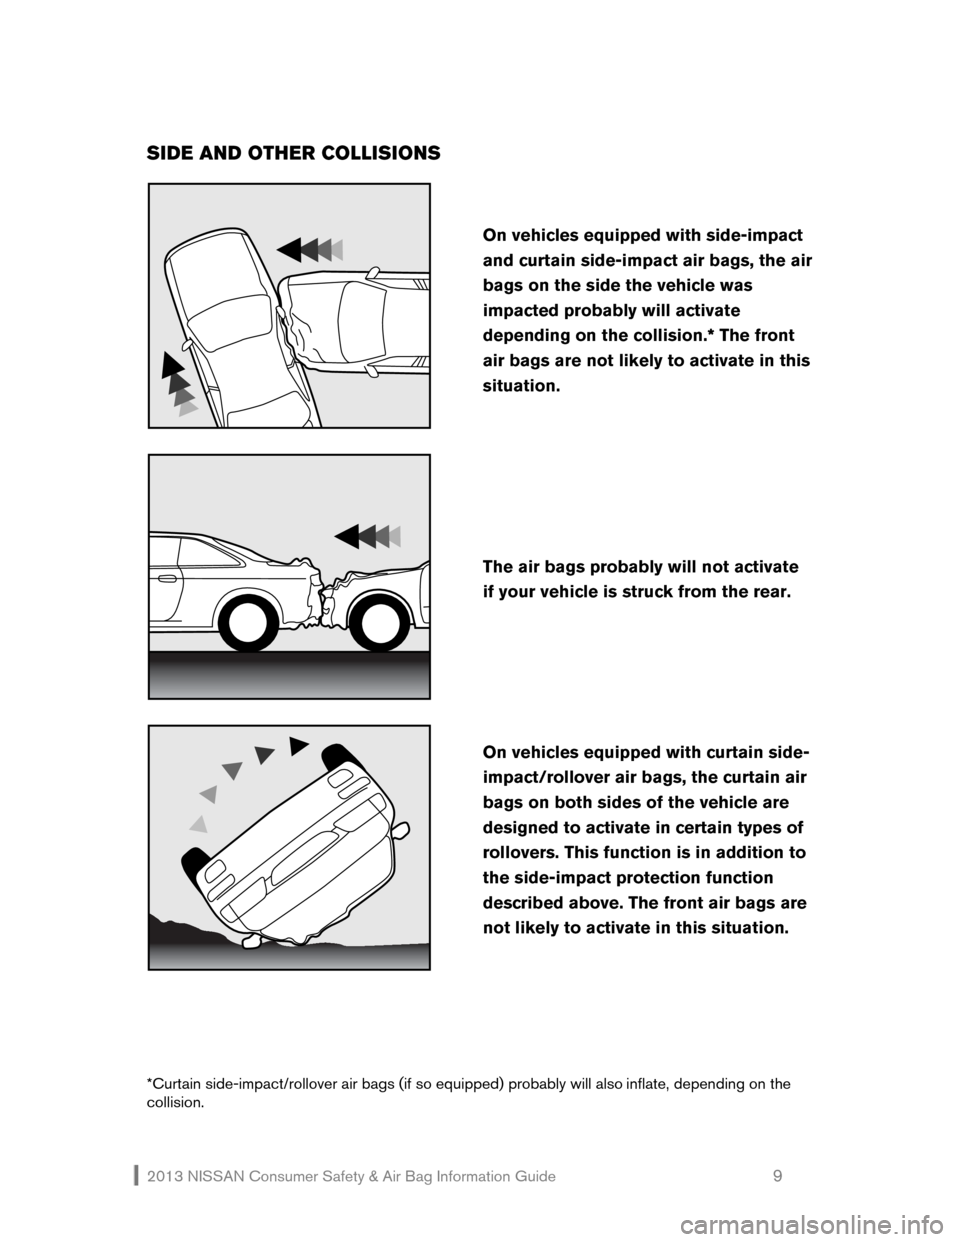 NISSAN TITAN 2013 1.G Consumer Safety Air Bag Information Guide 2013 NISSAN Consumer Safety & Air Bag Information Guide                                                   9 
SIDE AND OTHER COLLISIONS 
 
 
 
 
 
*Curtain side-impact/rollover air bags (if so equipped